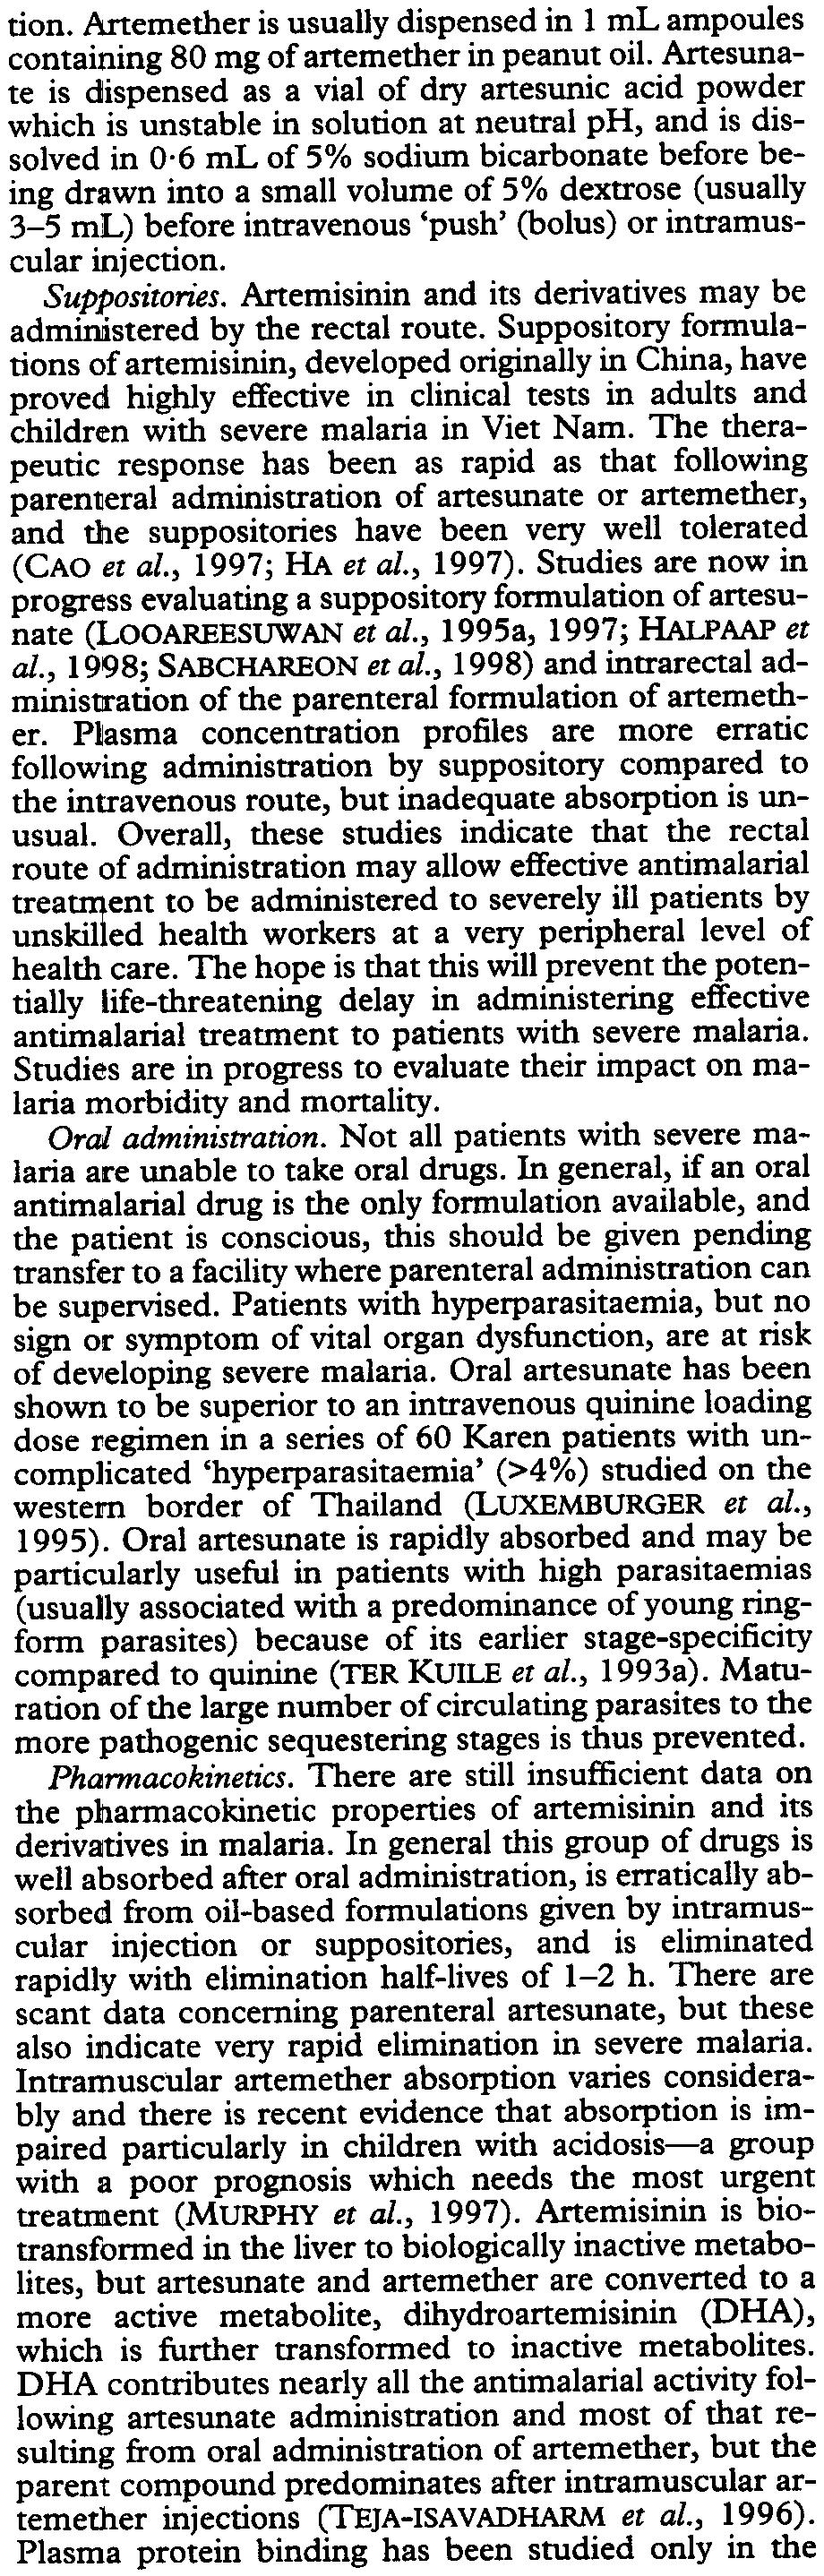 TRANSCnONS OFTHE ROYAL SOCIETY OFTROPICAL MEDICINE AND HYGIENE (2000) 94, SUPPLEMENT 81/37 tion. Artemether is usually dispensed in 1 ml ampoules containing 80 mg of anemether in peanut oil.